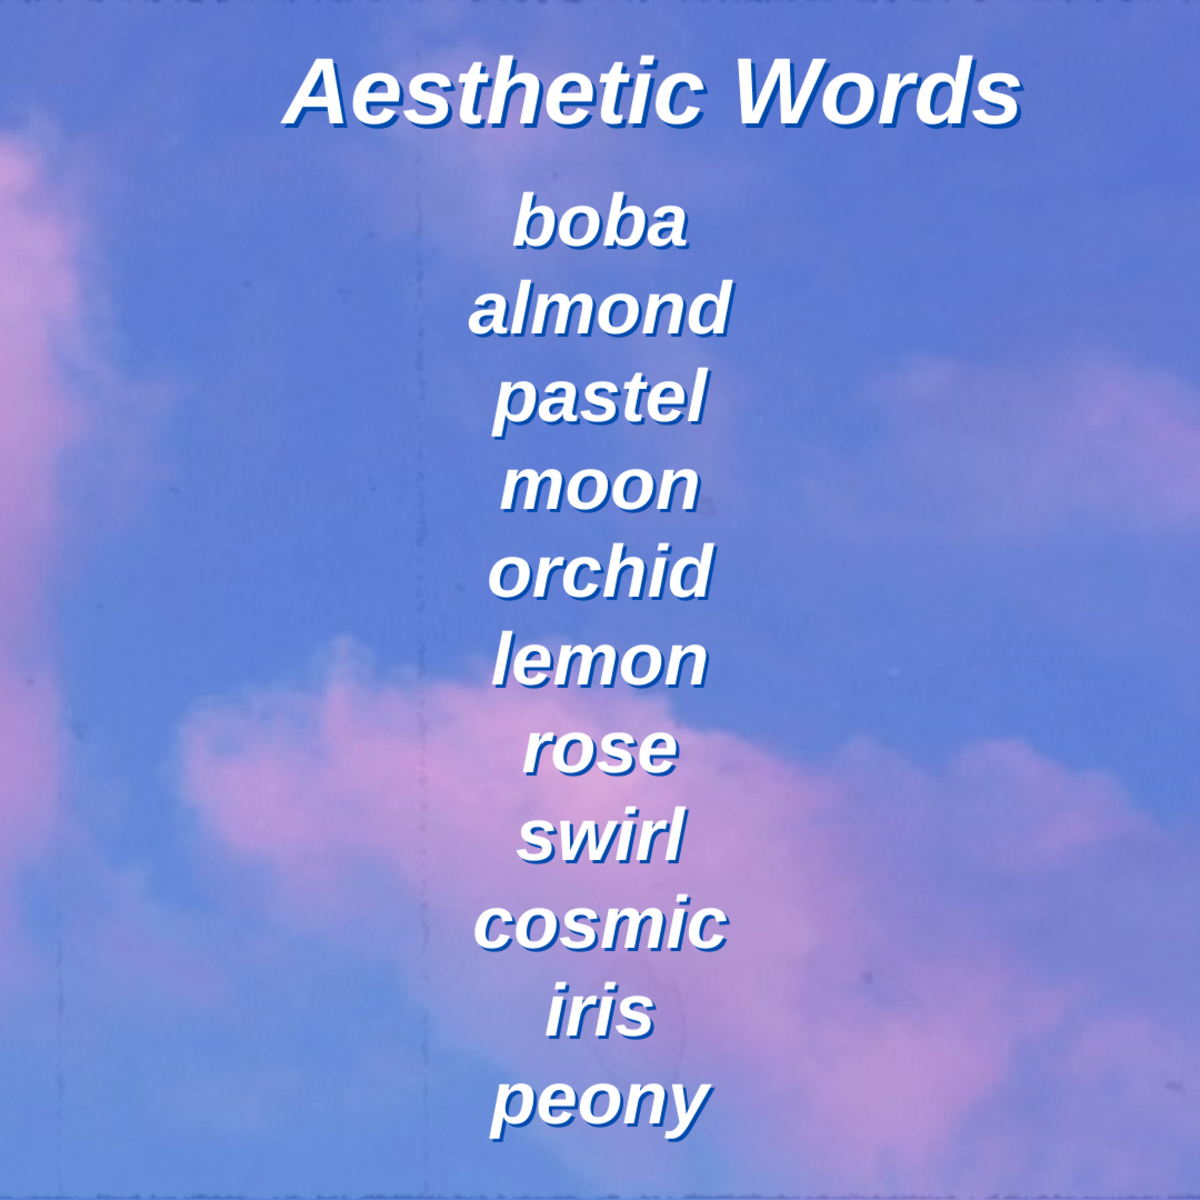 You could try combining some of the cottagecore terms above or below the aesthetic words here!